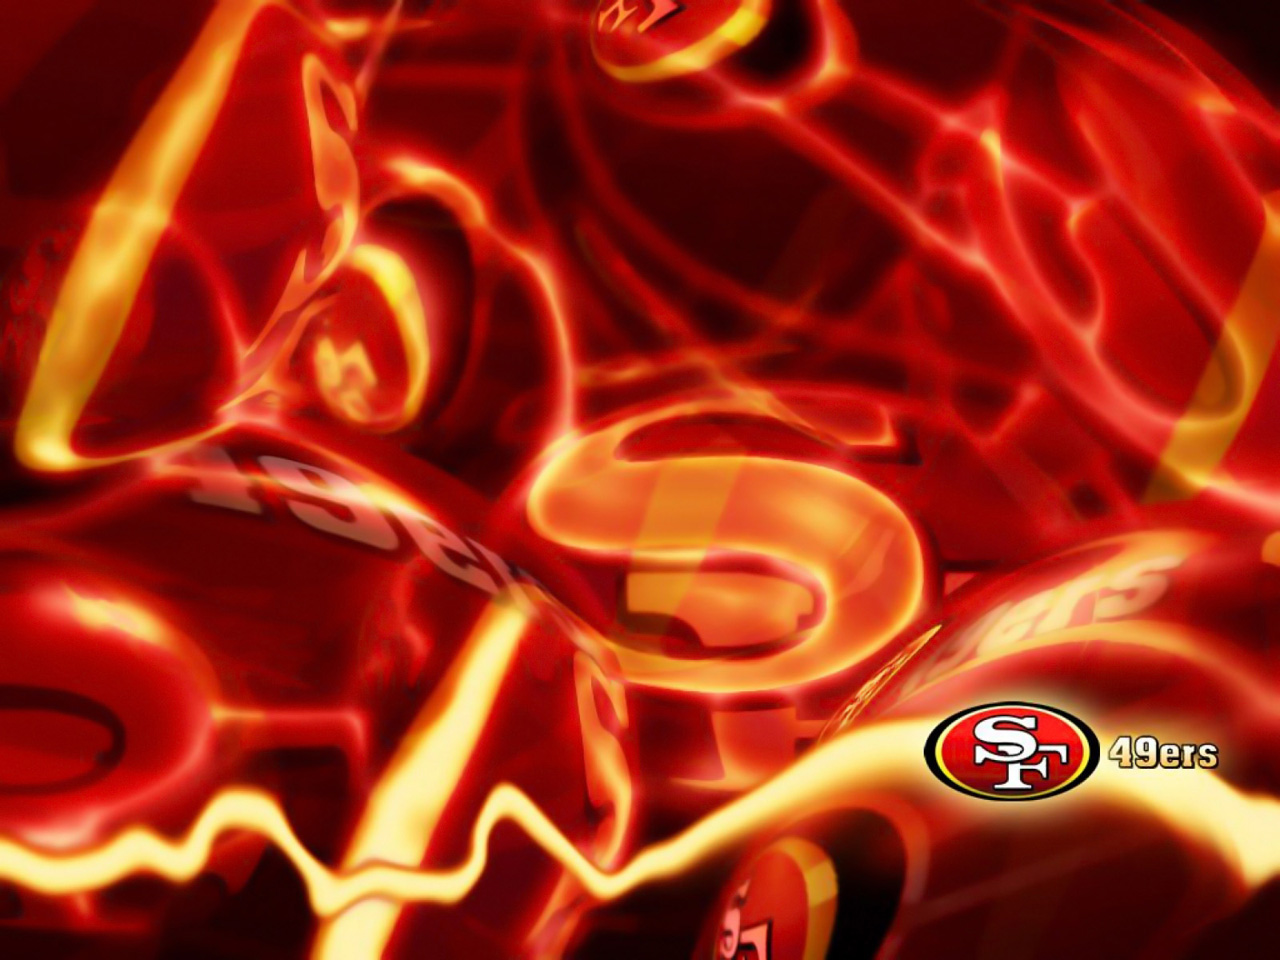 This San Francisco 49ers Wallpaper Background